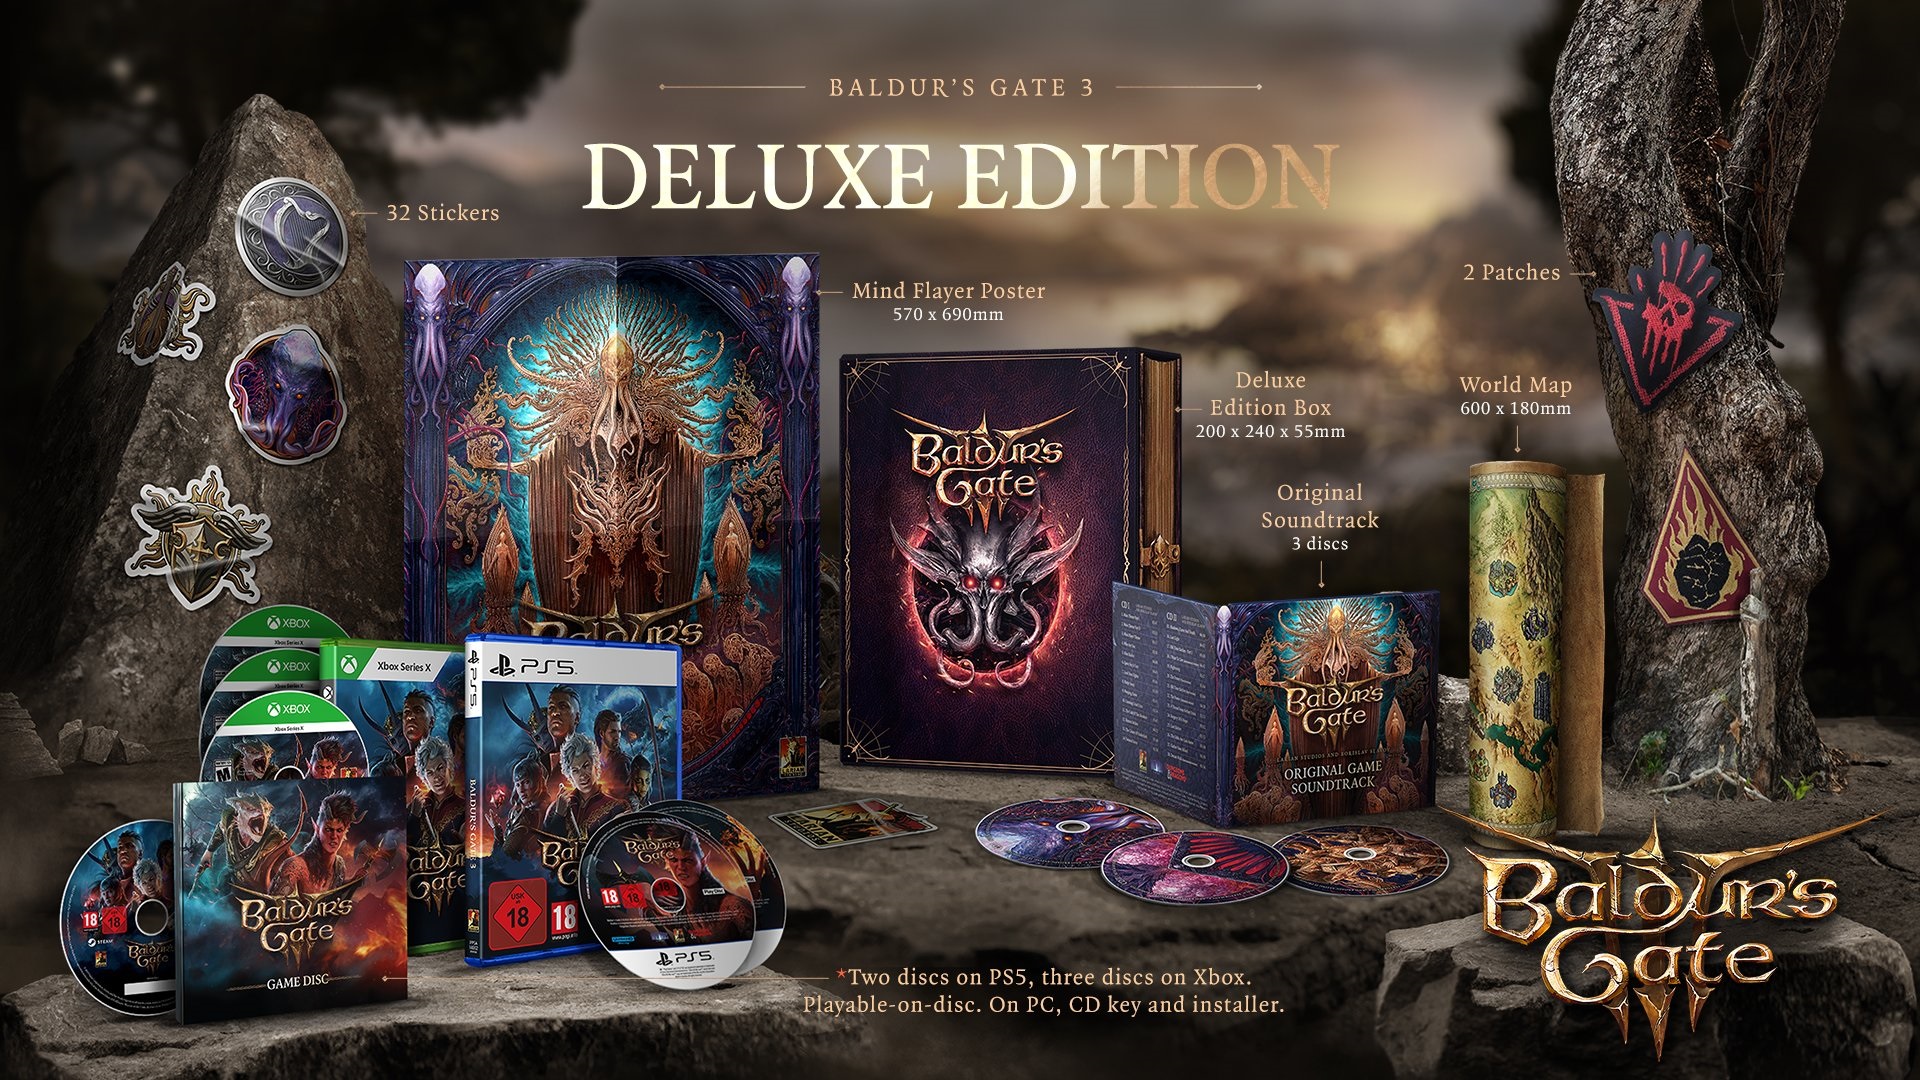 Baldur’s Gate 3 is getting a physical Deluxe Edition next year